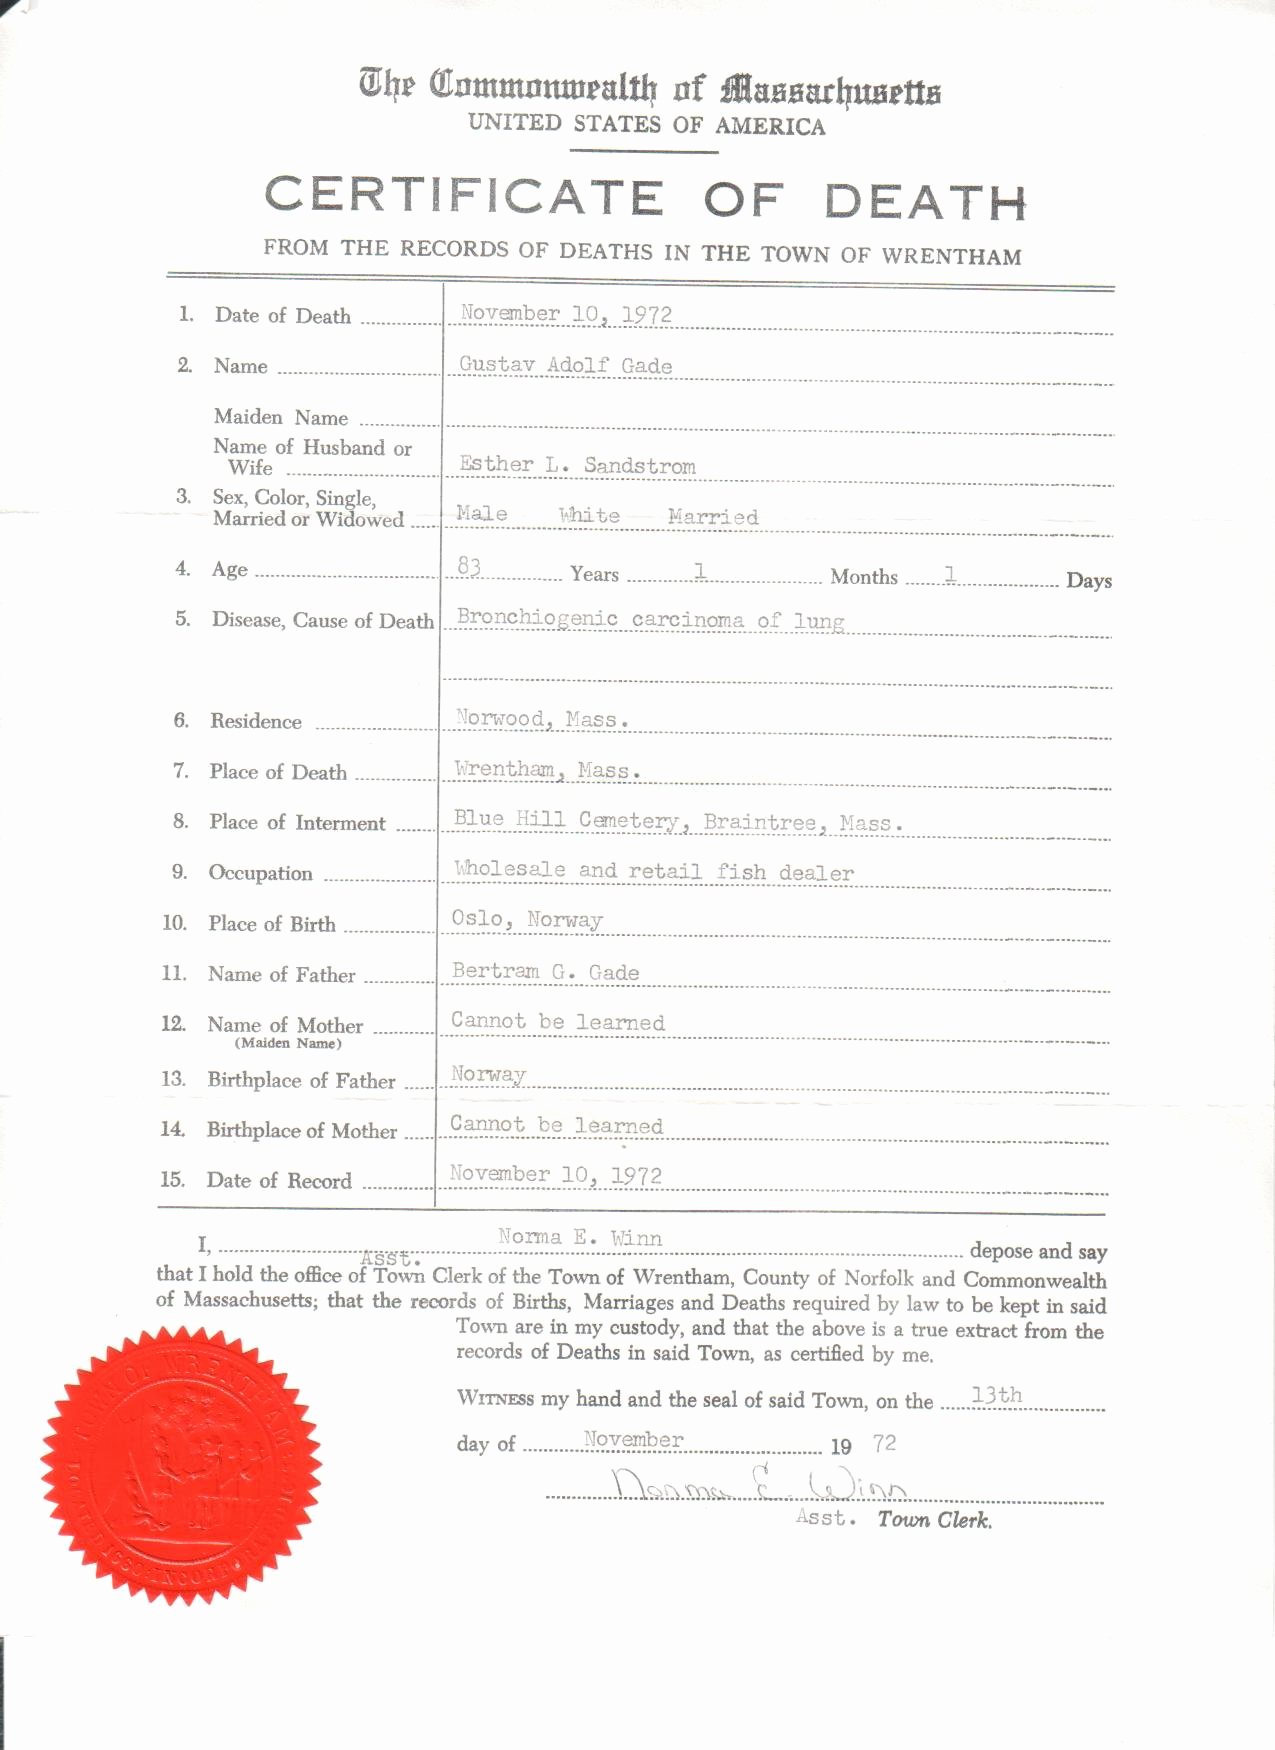 Death Certificate Template Word New Wood Gade Documents – Relatively Speaking